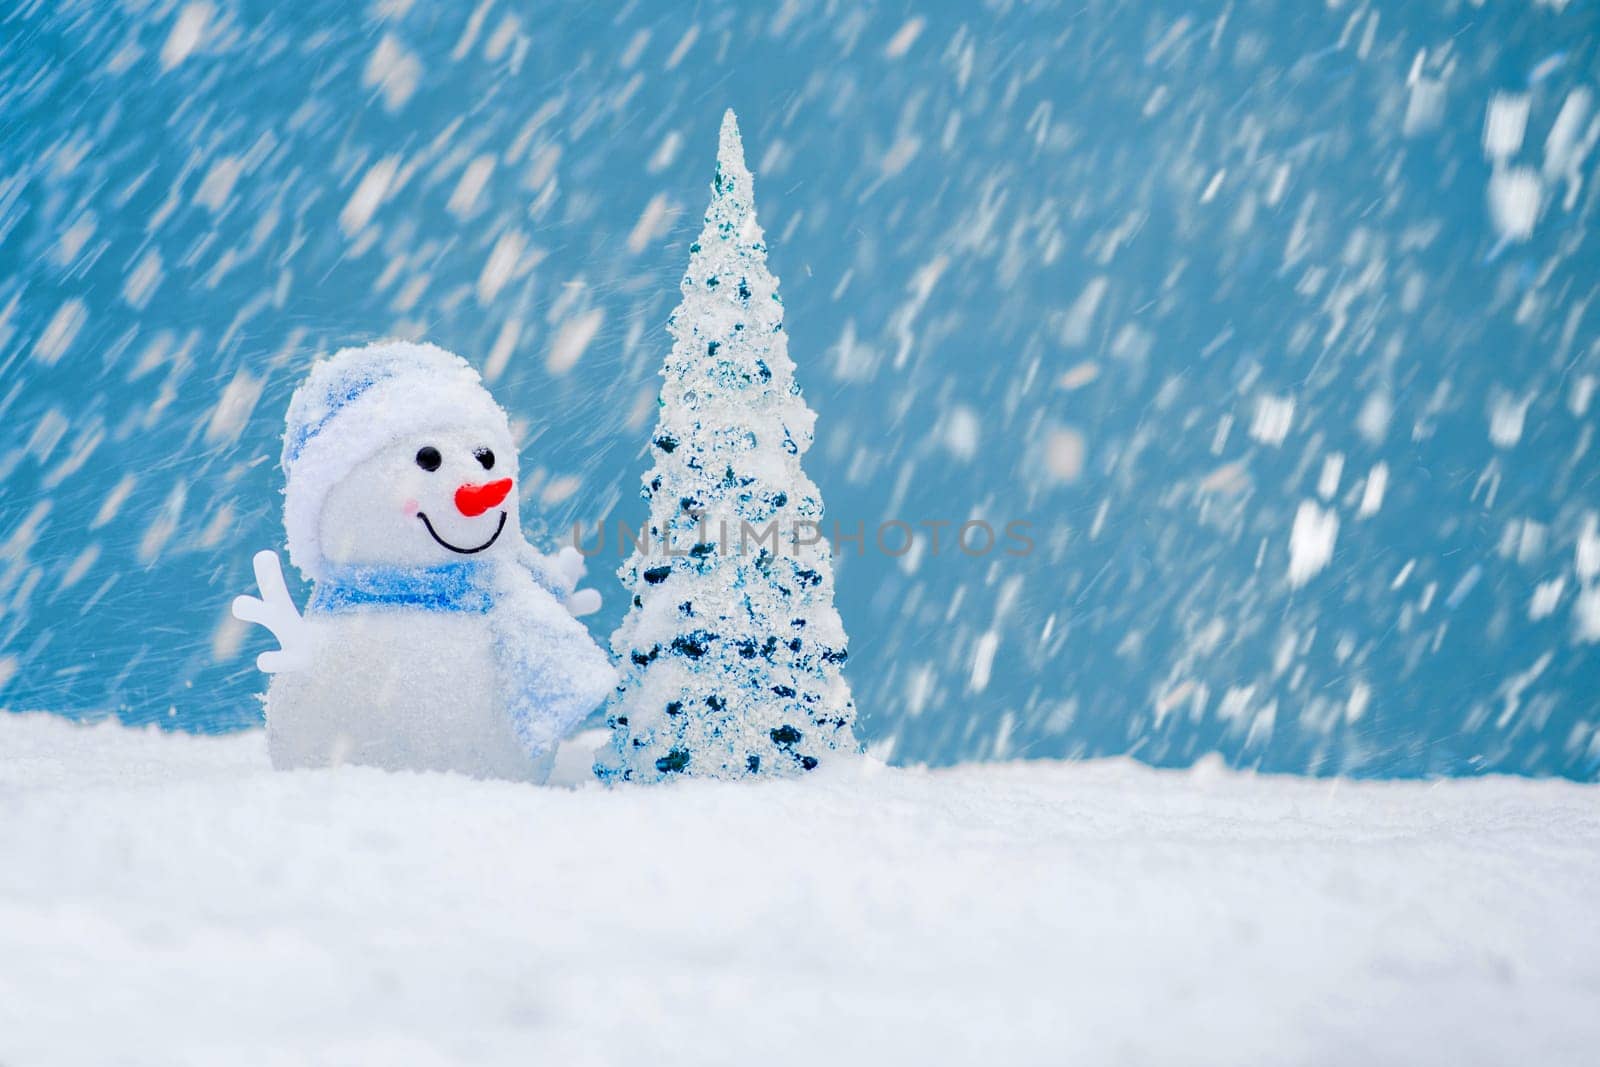 Happy snowman with Christmas tree in winter scenery with copy space. Christmas background with snowman.